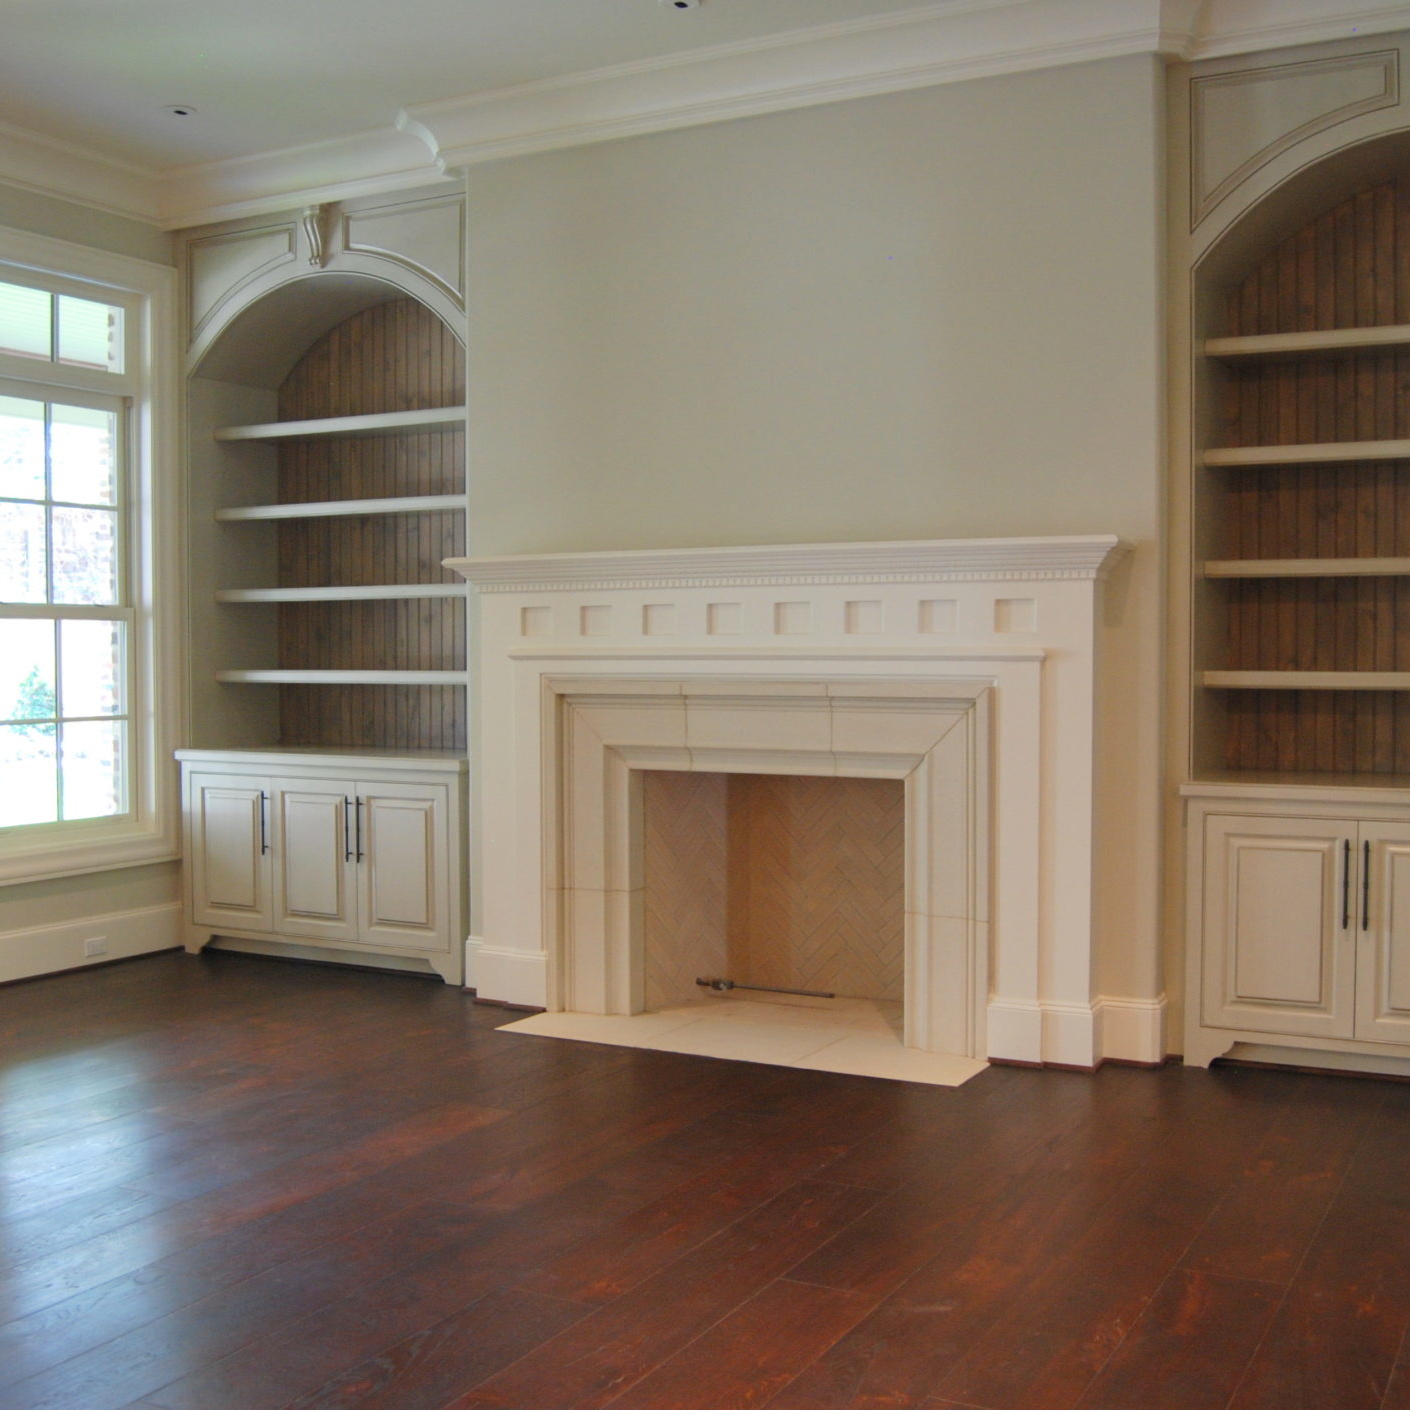 Newly remodeled living room with fireplace and built-in bookshelves